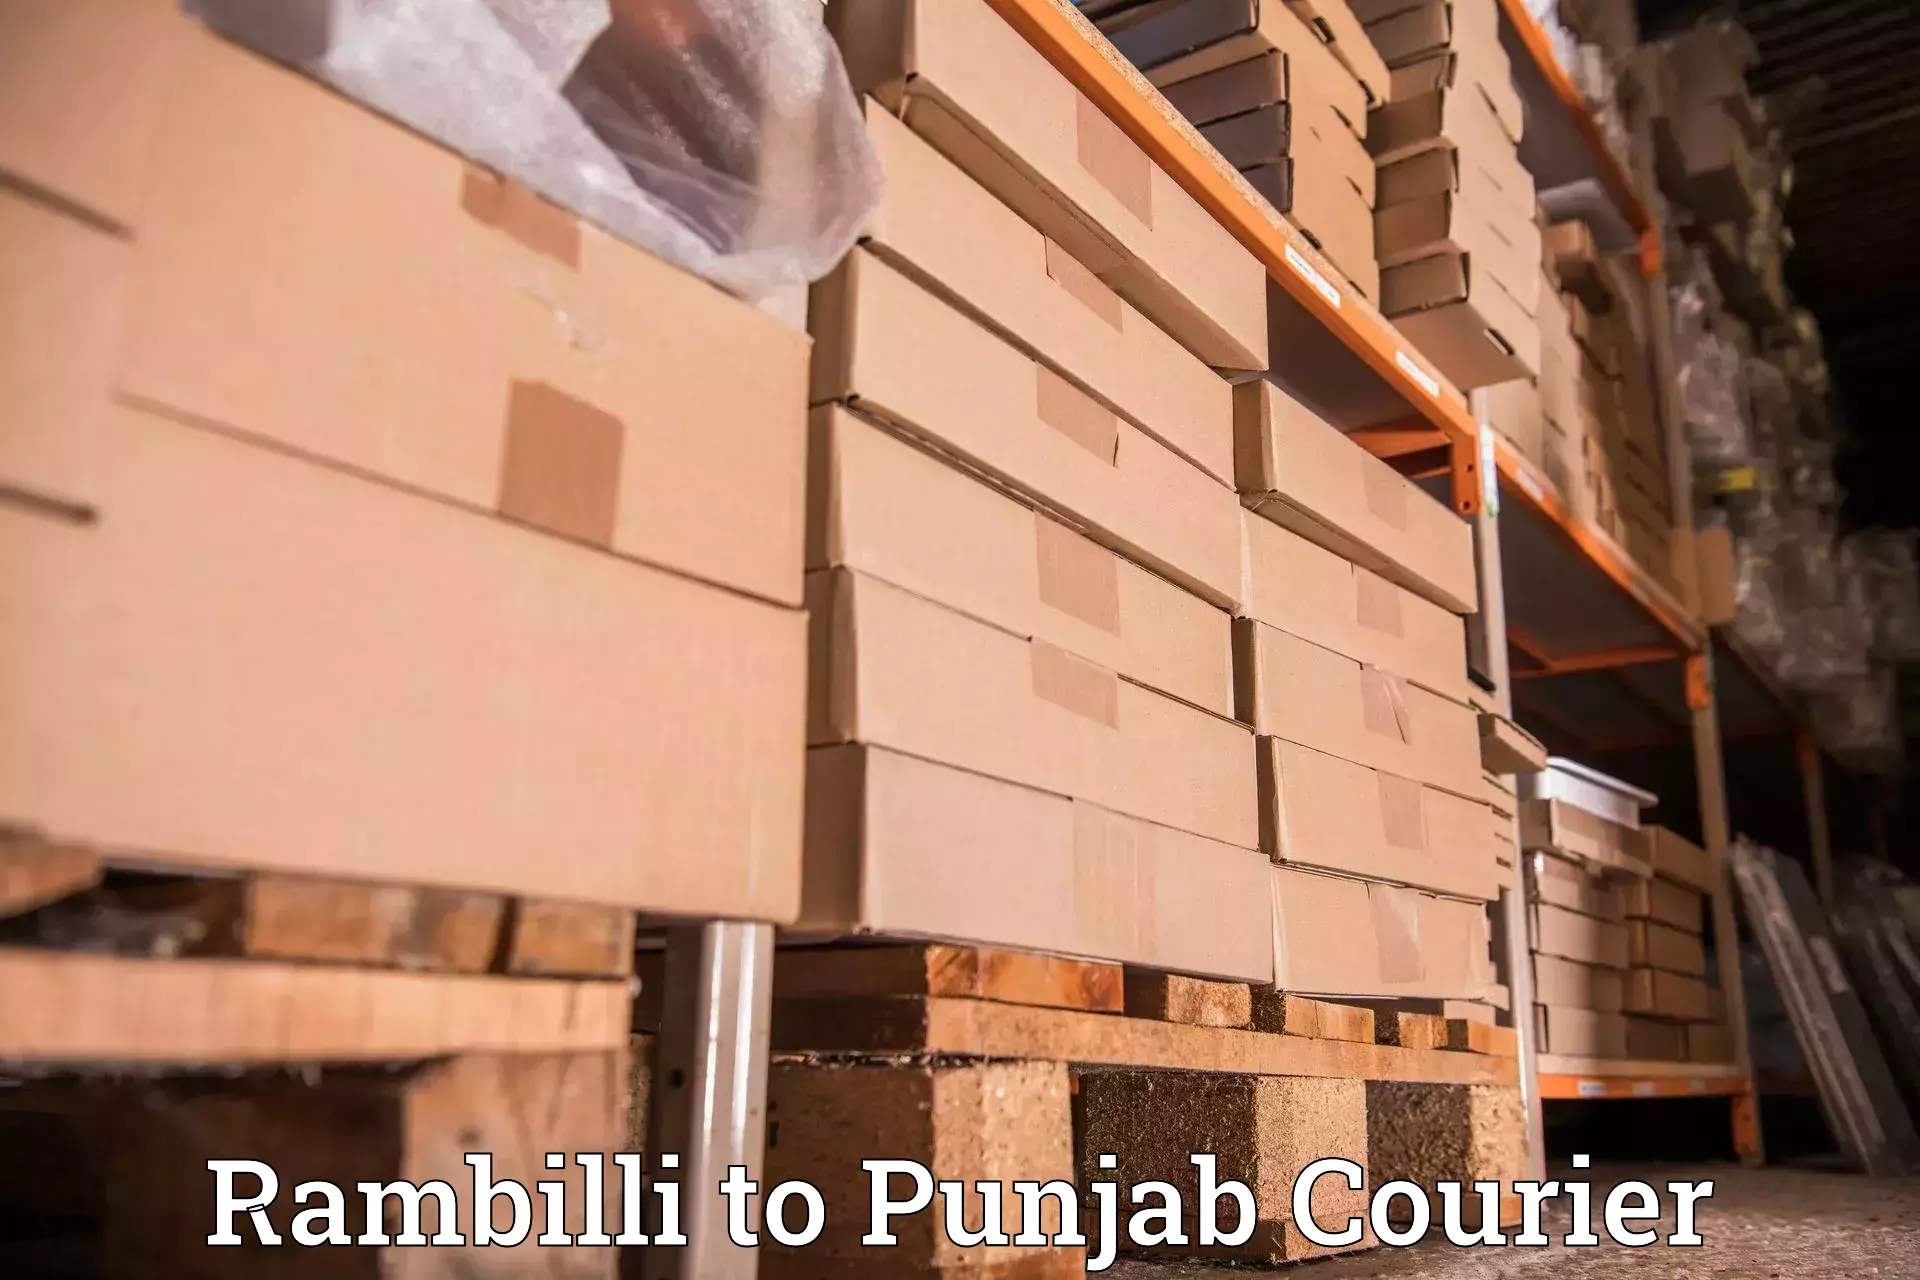 24-hour courier service Rambilli to Punjab